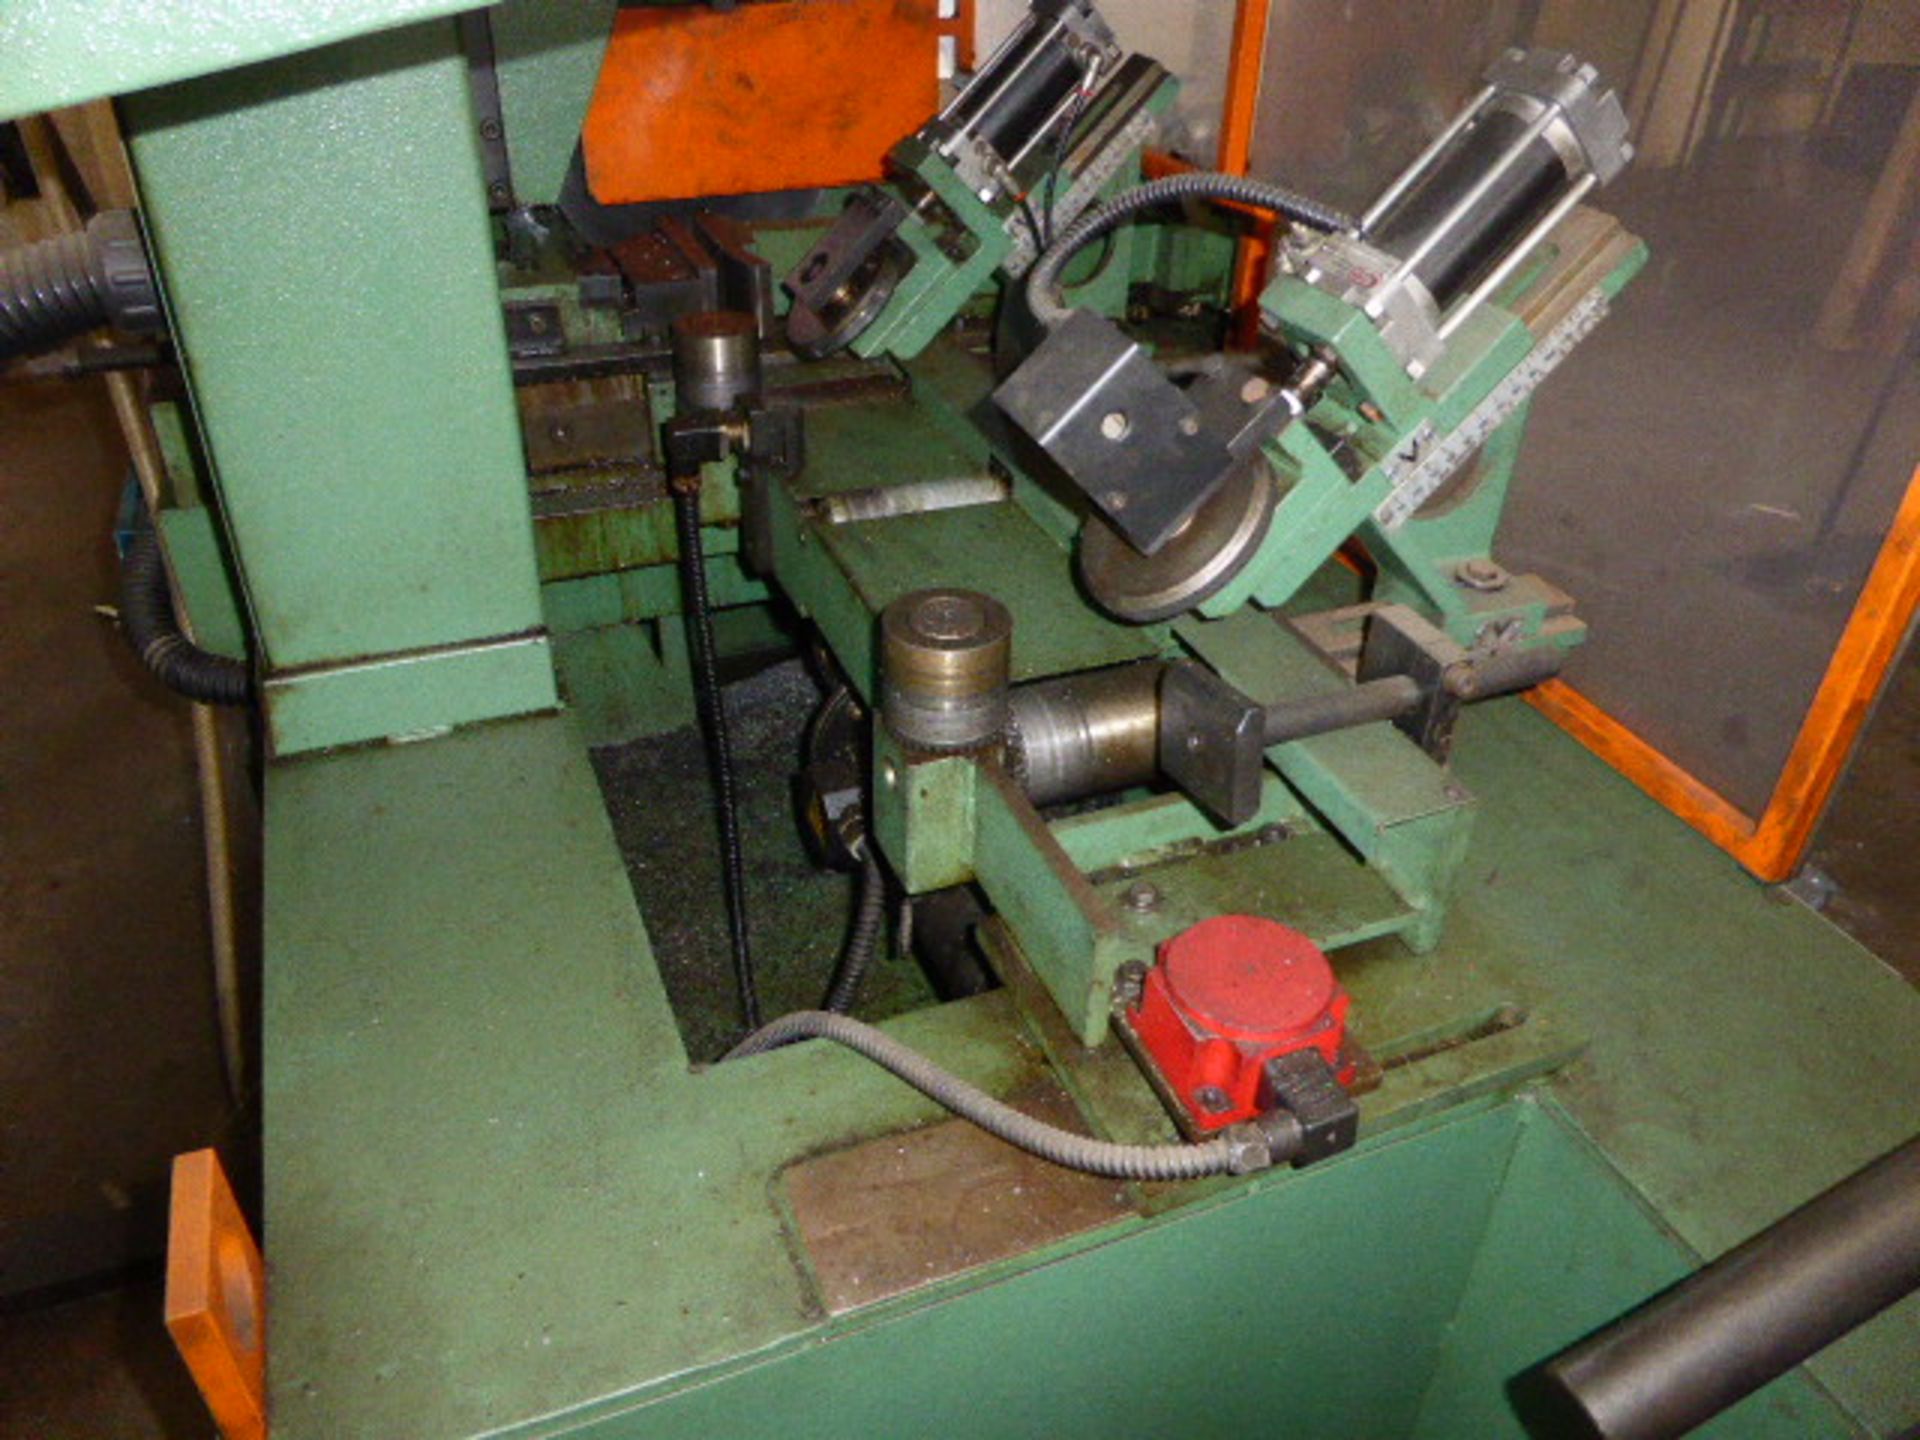 OMP Segatrice model Euromatic 370CS automatic cold saw with auto feed, serial no: 8297, year: 1997 - - Image 14 of 18